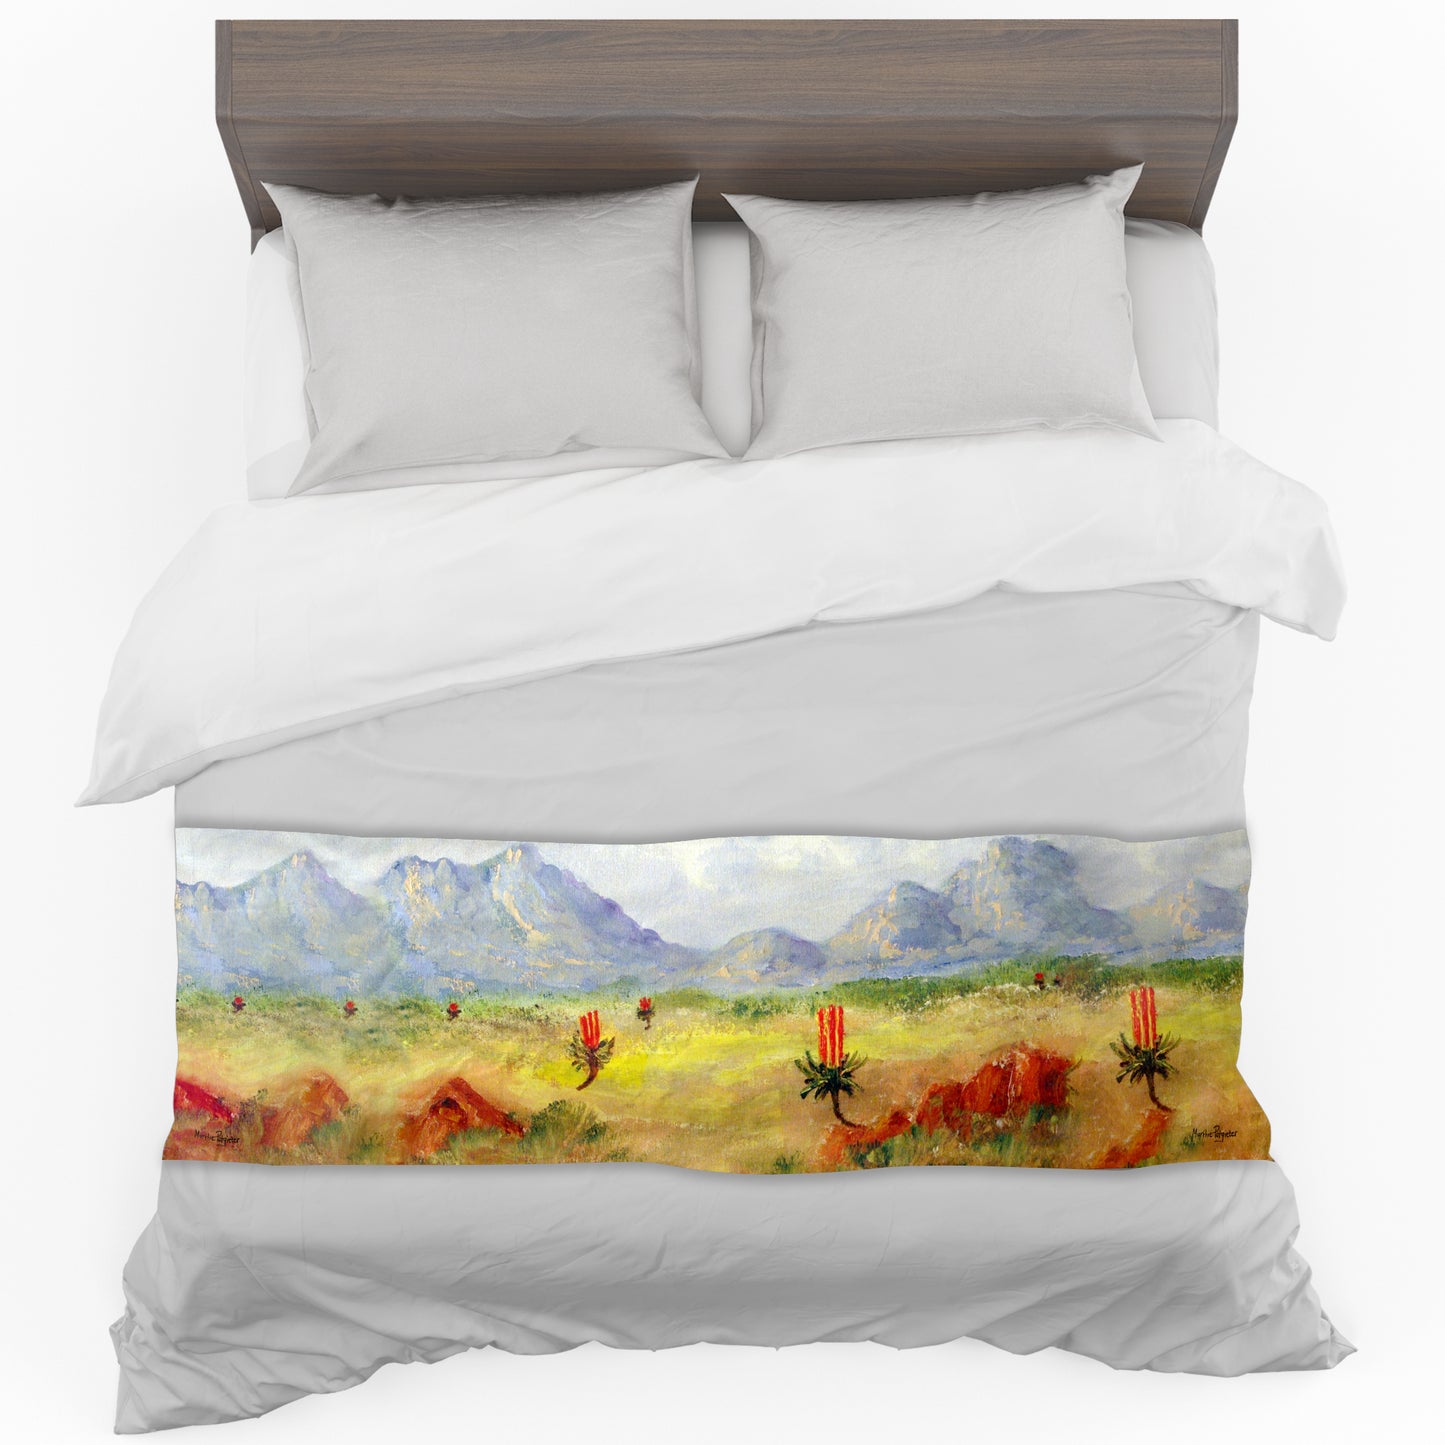 Aloe Mountain View By Marthie Potgieter Bed Runner and Optional Pillowcases